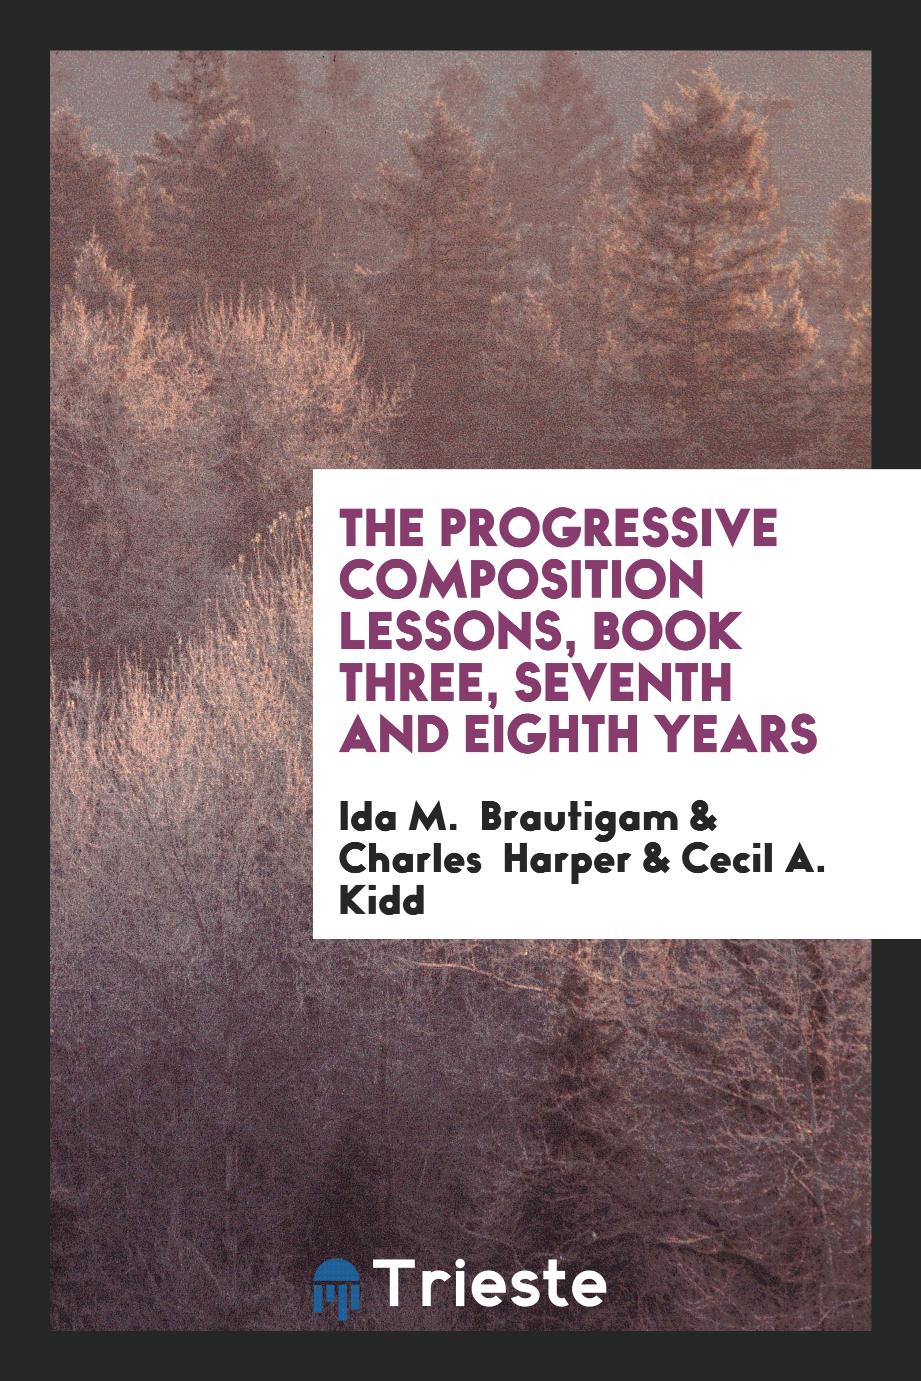 The Progressive Composition Lessons, Book Three, Seventh and Eighth Years